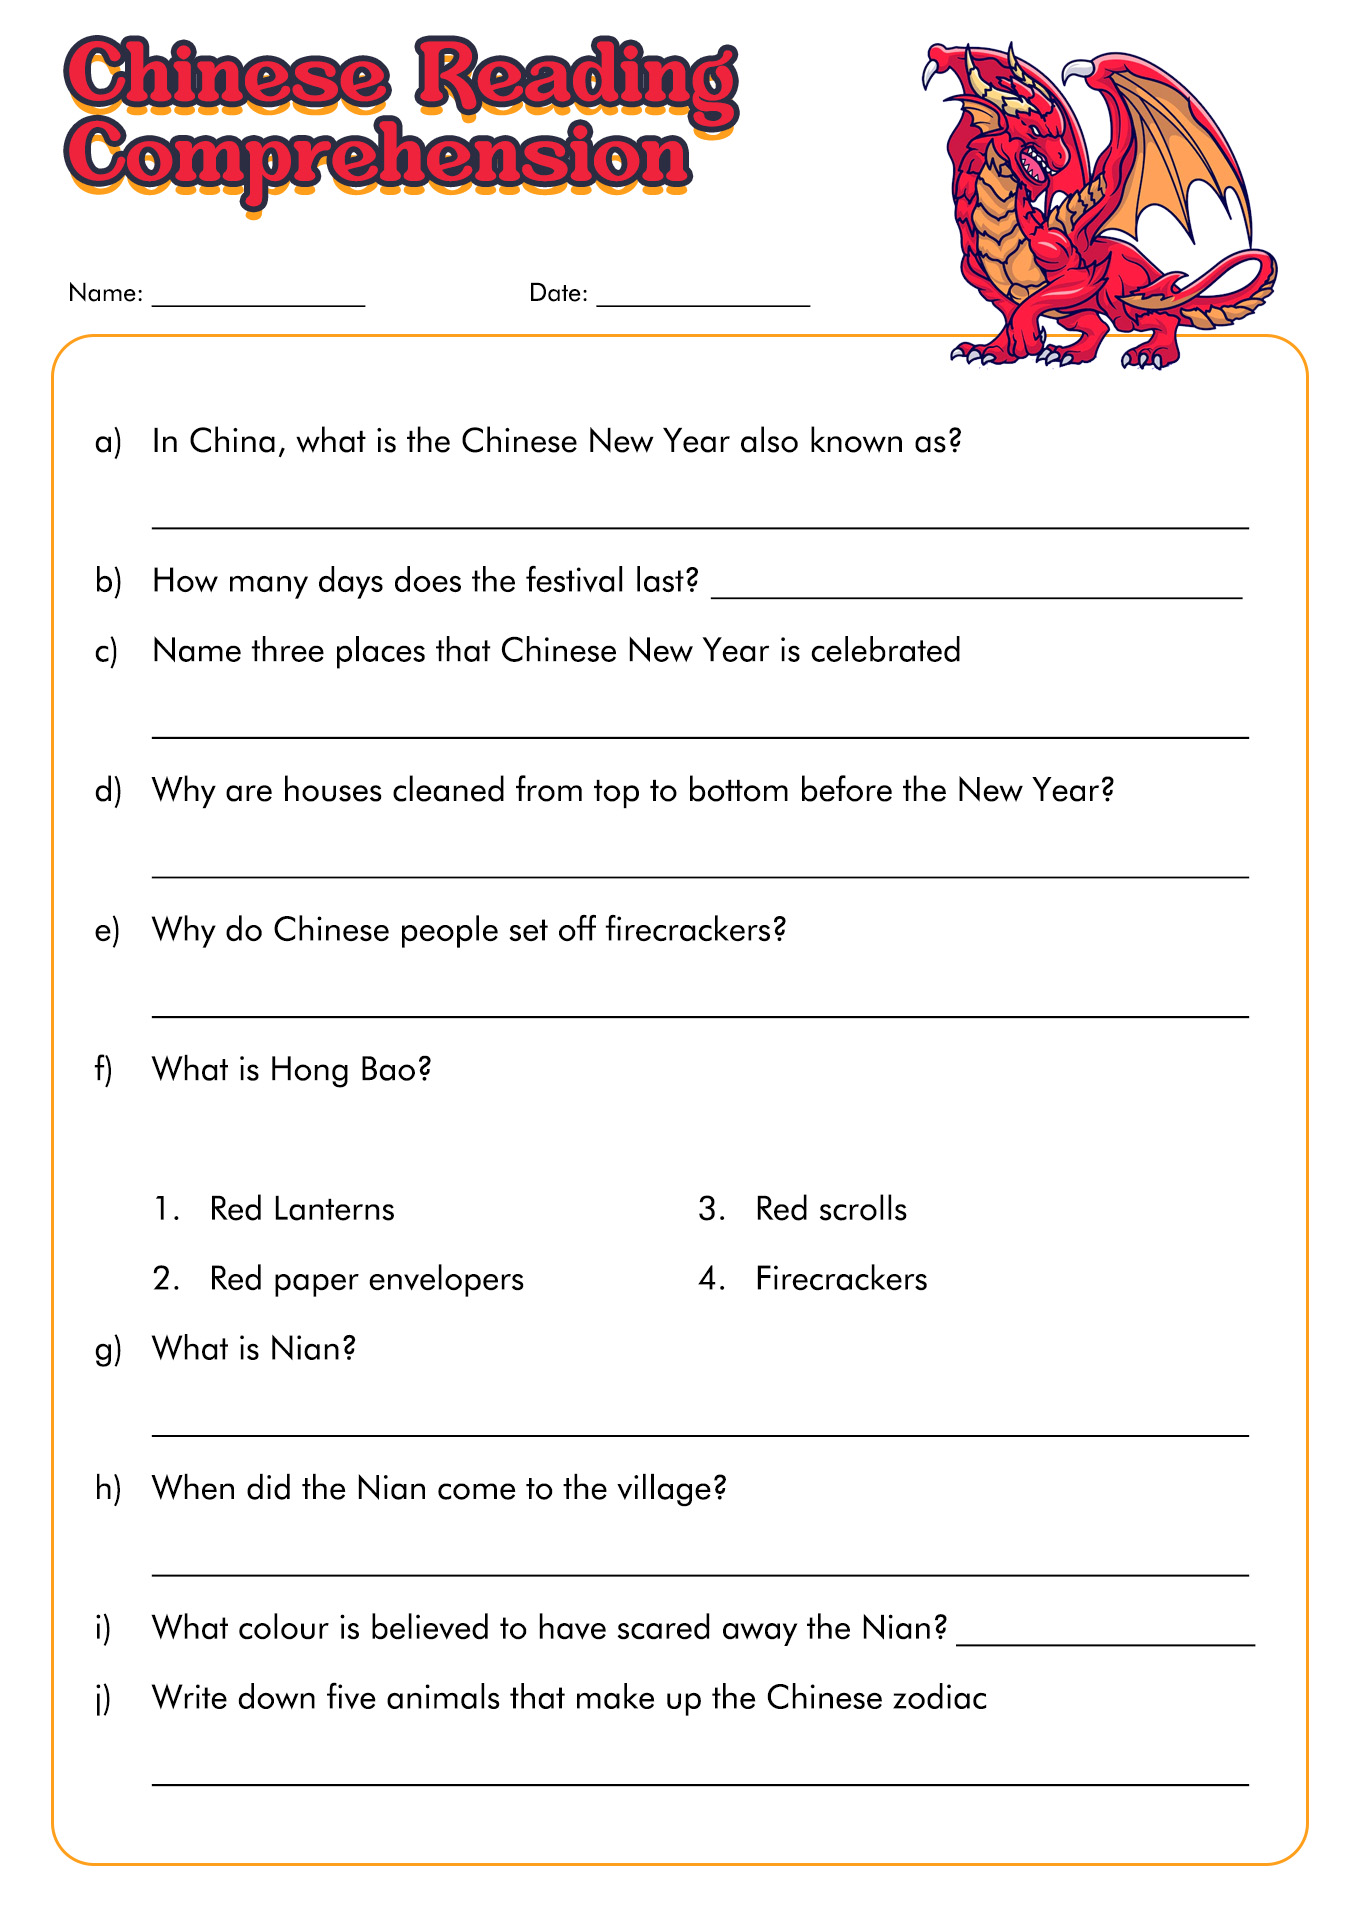 Chinese New Year Reading Comprehension Image